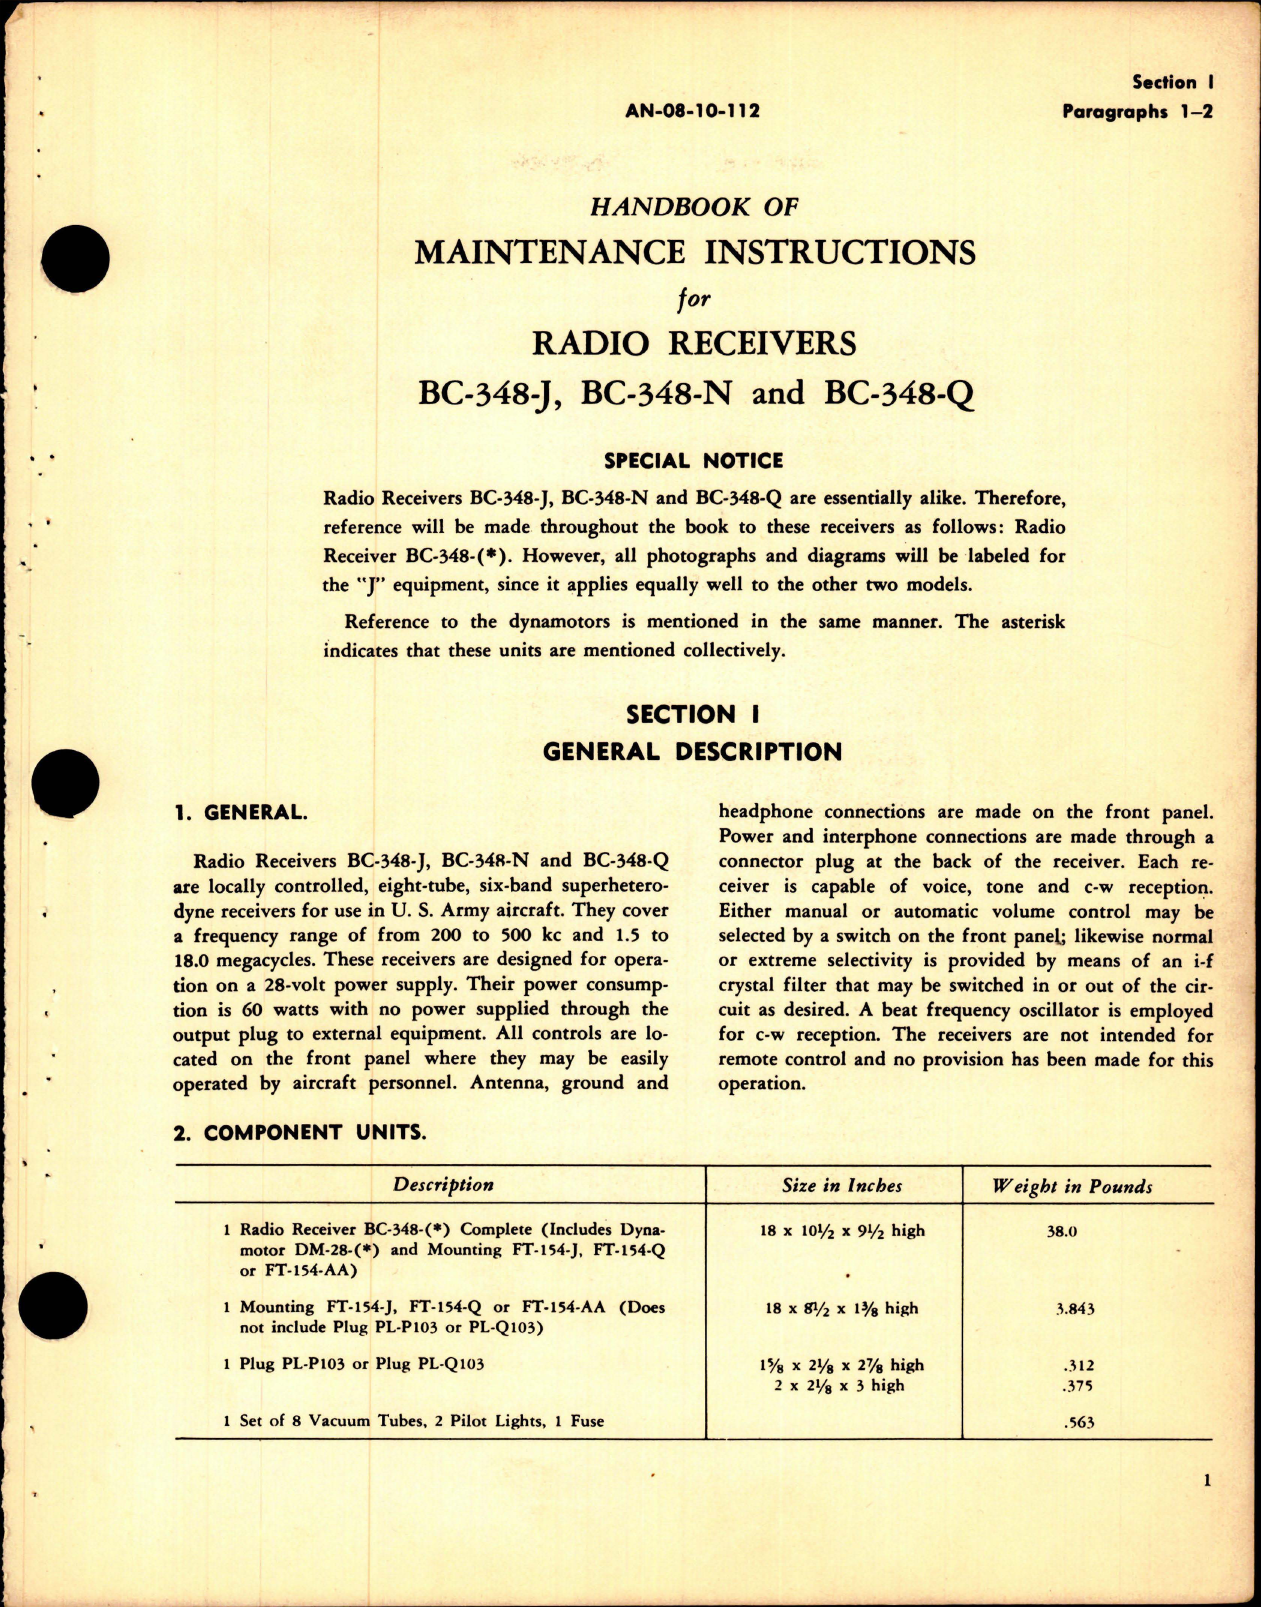 Sample page 9 from AirCorps Library document: Maintenance Instructions for Radio Receivers - BC-348-J, BC-348-N and BC-348-Q